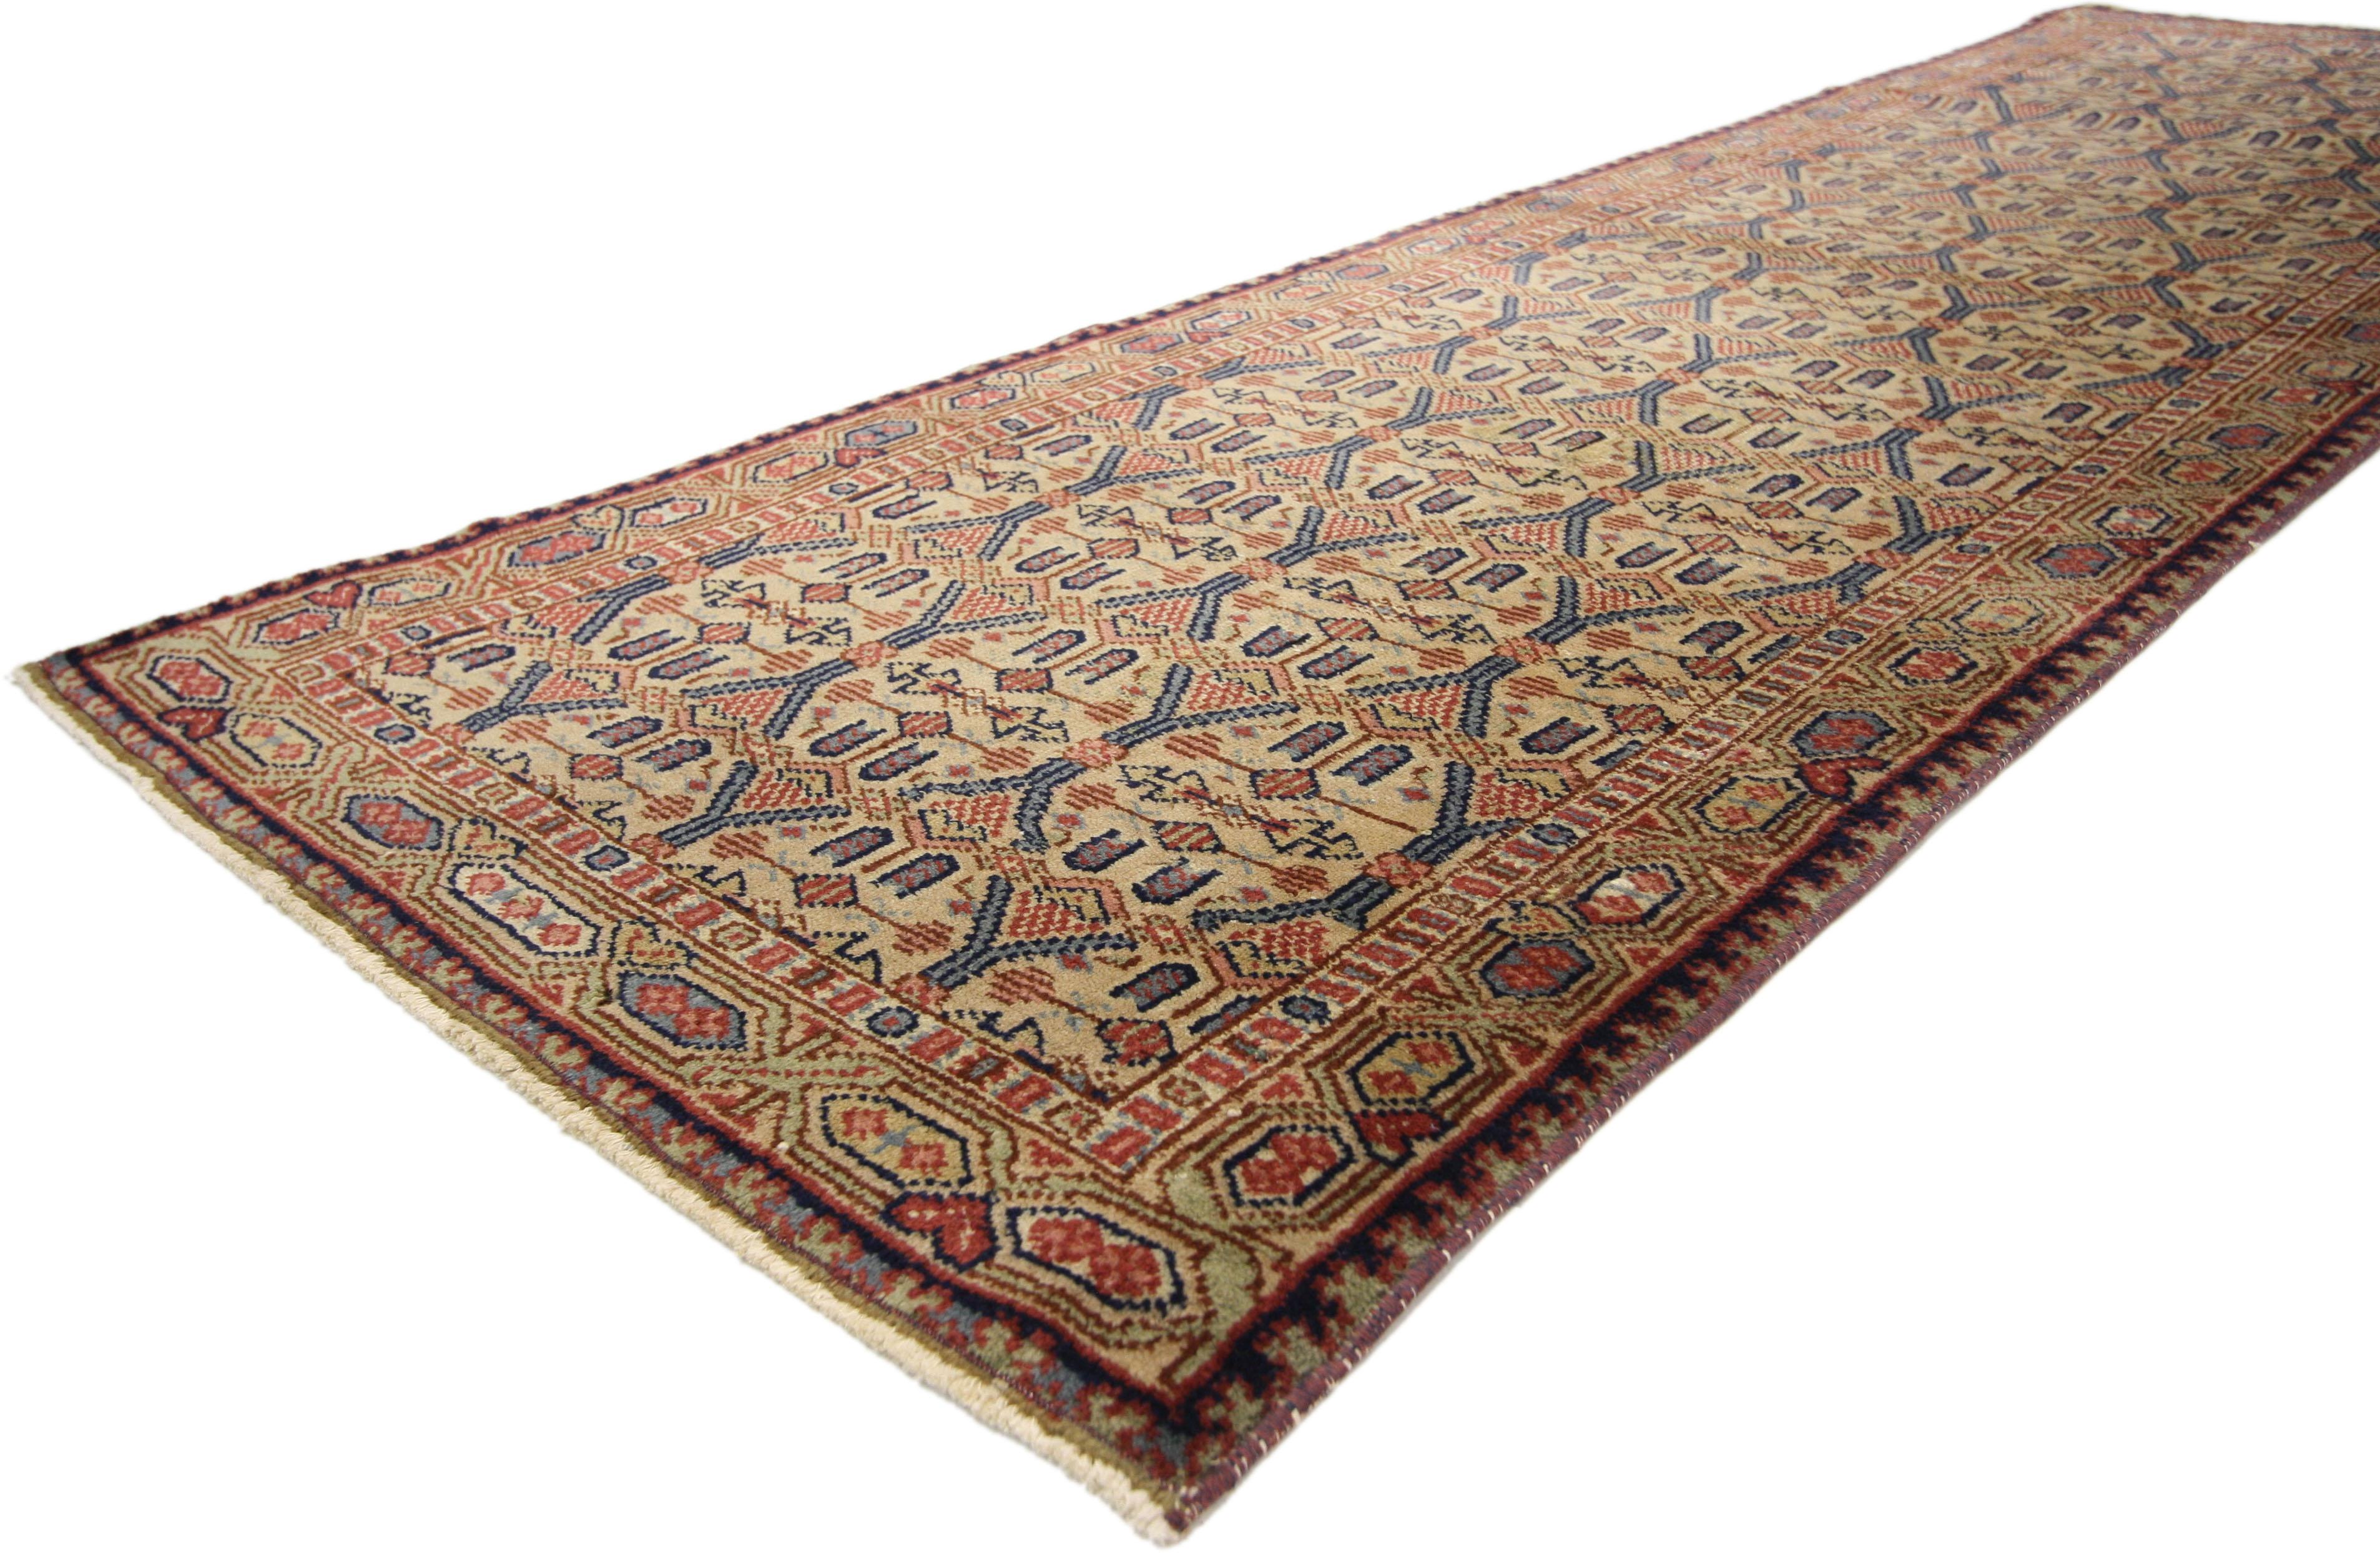 51338 Vintage Turkish Oushak Hallway Runner with Rustic Art Deco Style 02'09 x 08'08. Delicate yet bold, this hand-knotted wool vintage Turkish Oushak runner displays a geometric lattice pattern composed of symbolic Anatolian tribal motifs. Enhanced